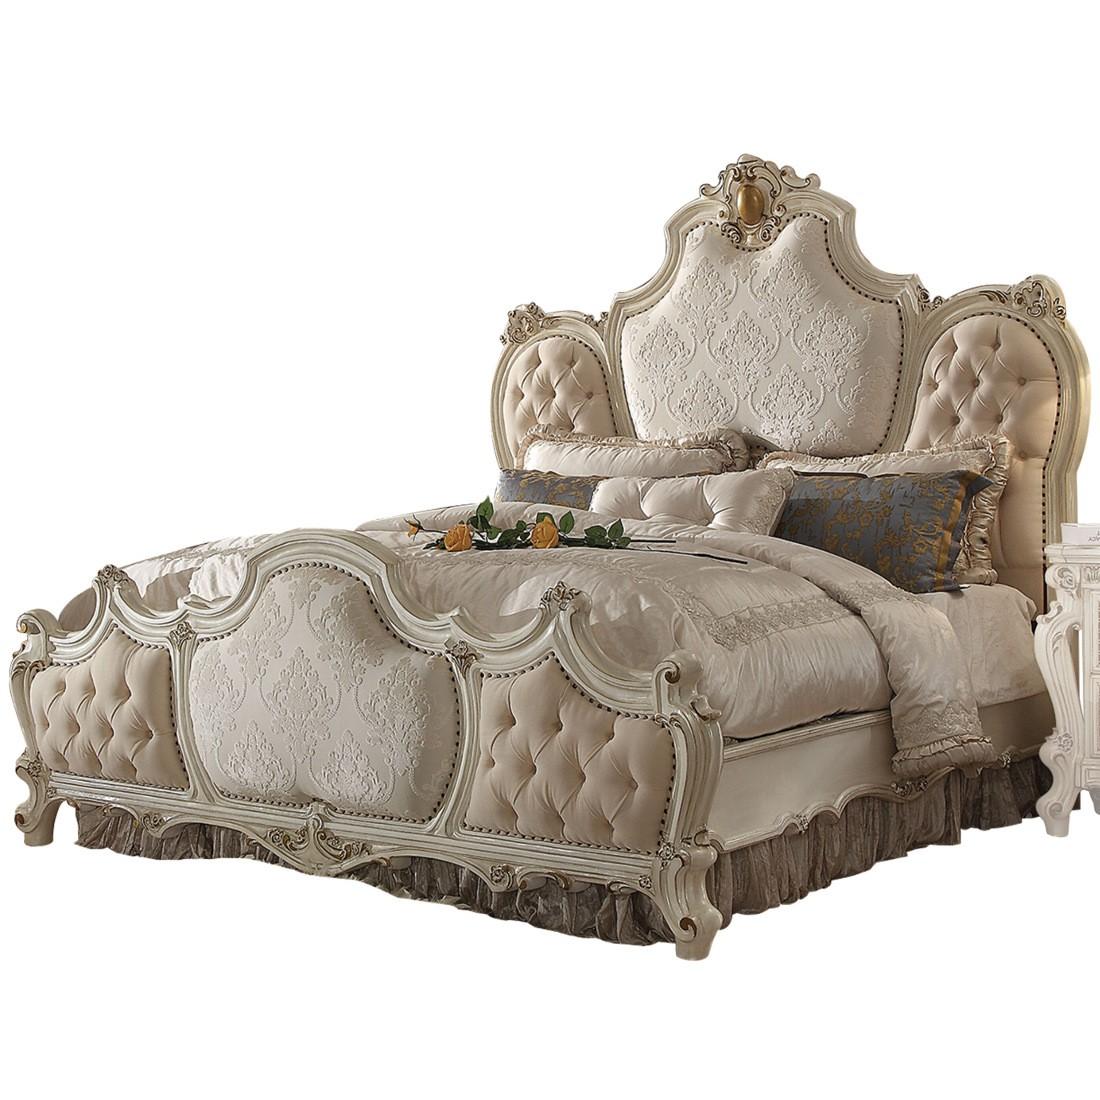 Classic, Traditional Panel Bed Picardy-26877EK Picardy-26877EK in Pearl, Antique Fabric